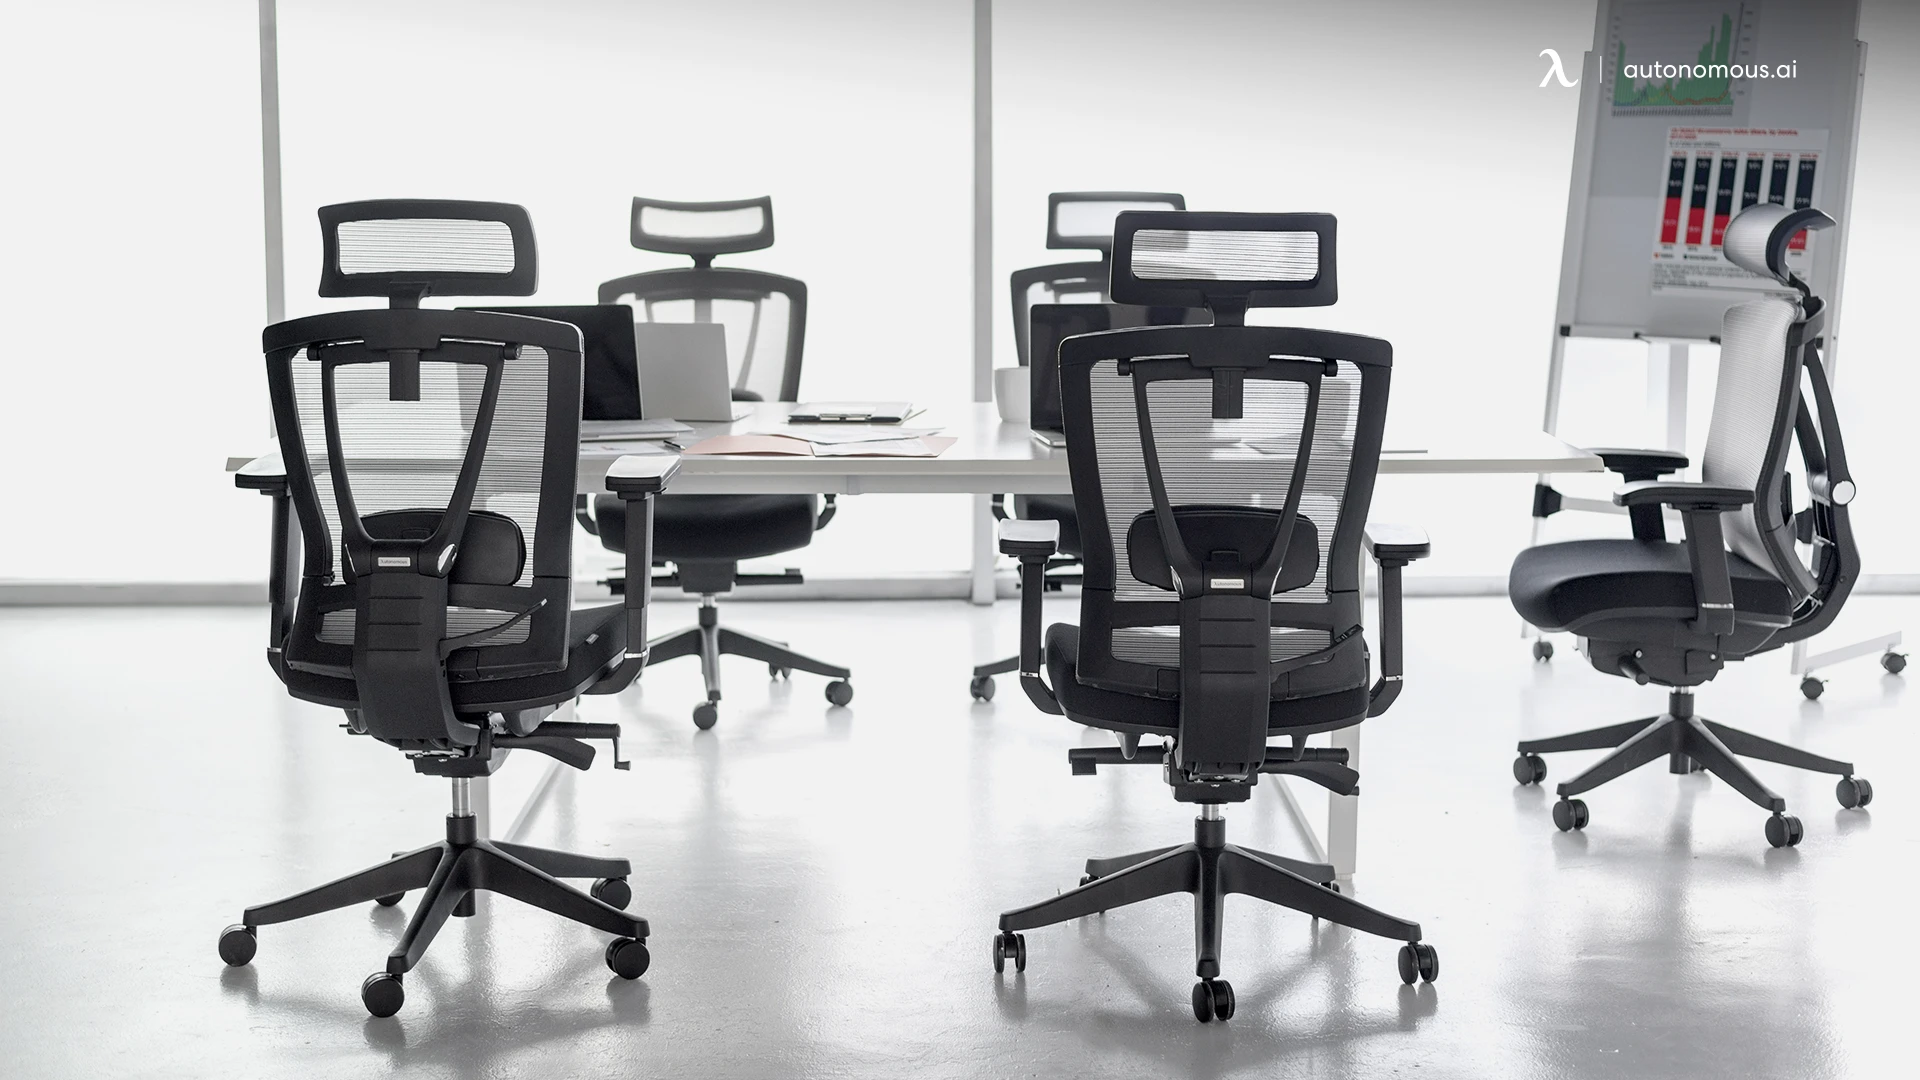 Gadgets and Other Essentials - office furniture in Dallas